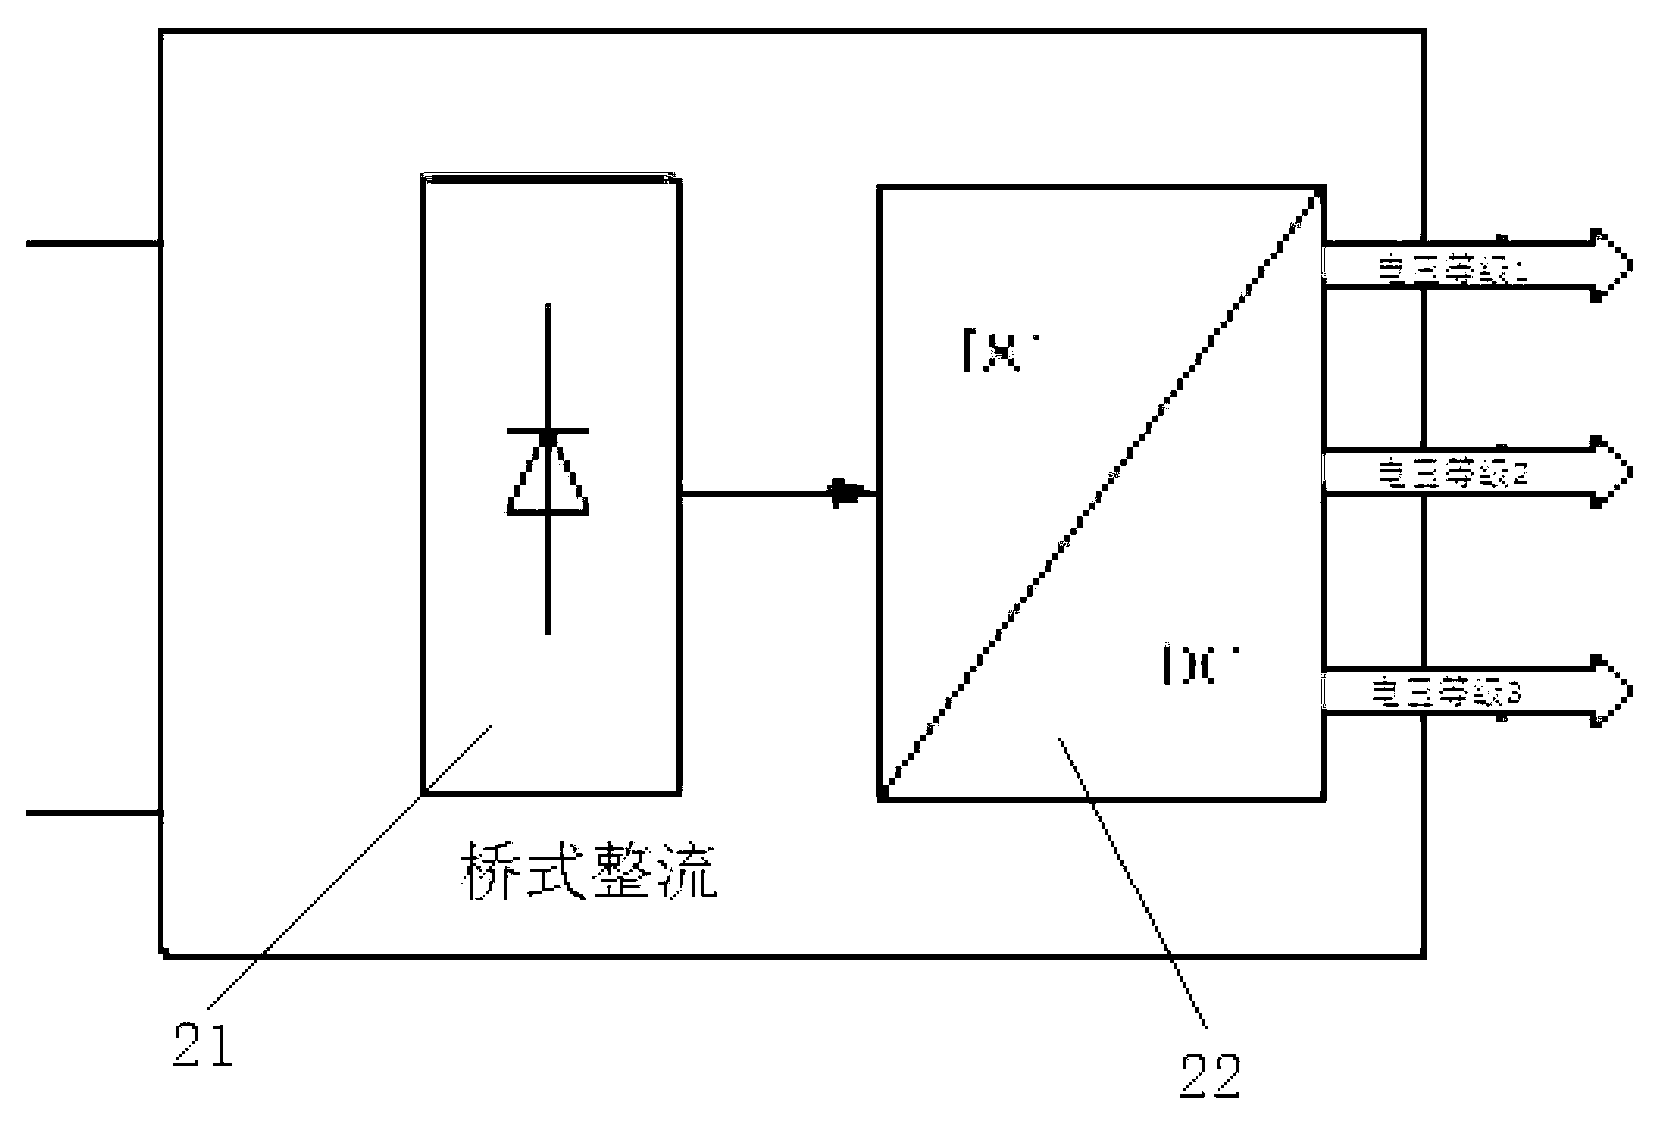 Wireless power transmission system applied to power supplying of high voltage line device